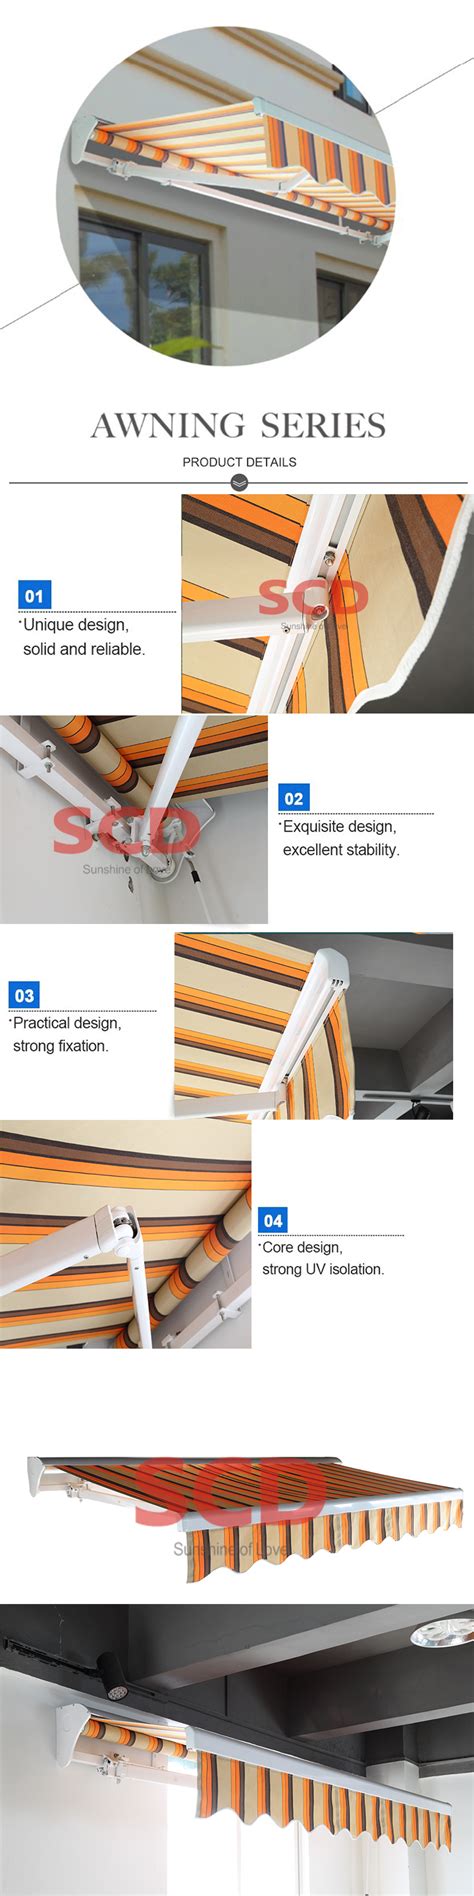 wholesale price simple retractable awning mechanism manual operation retractable awning buy